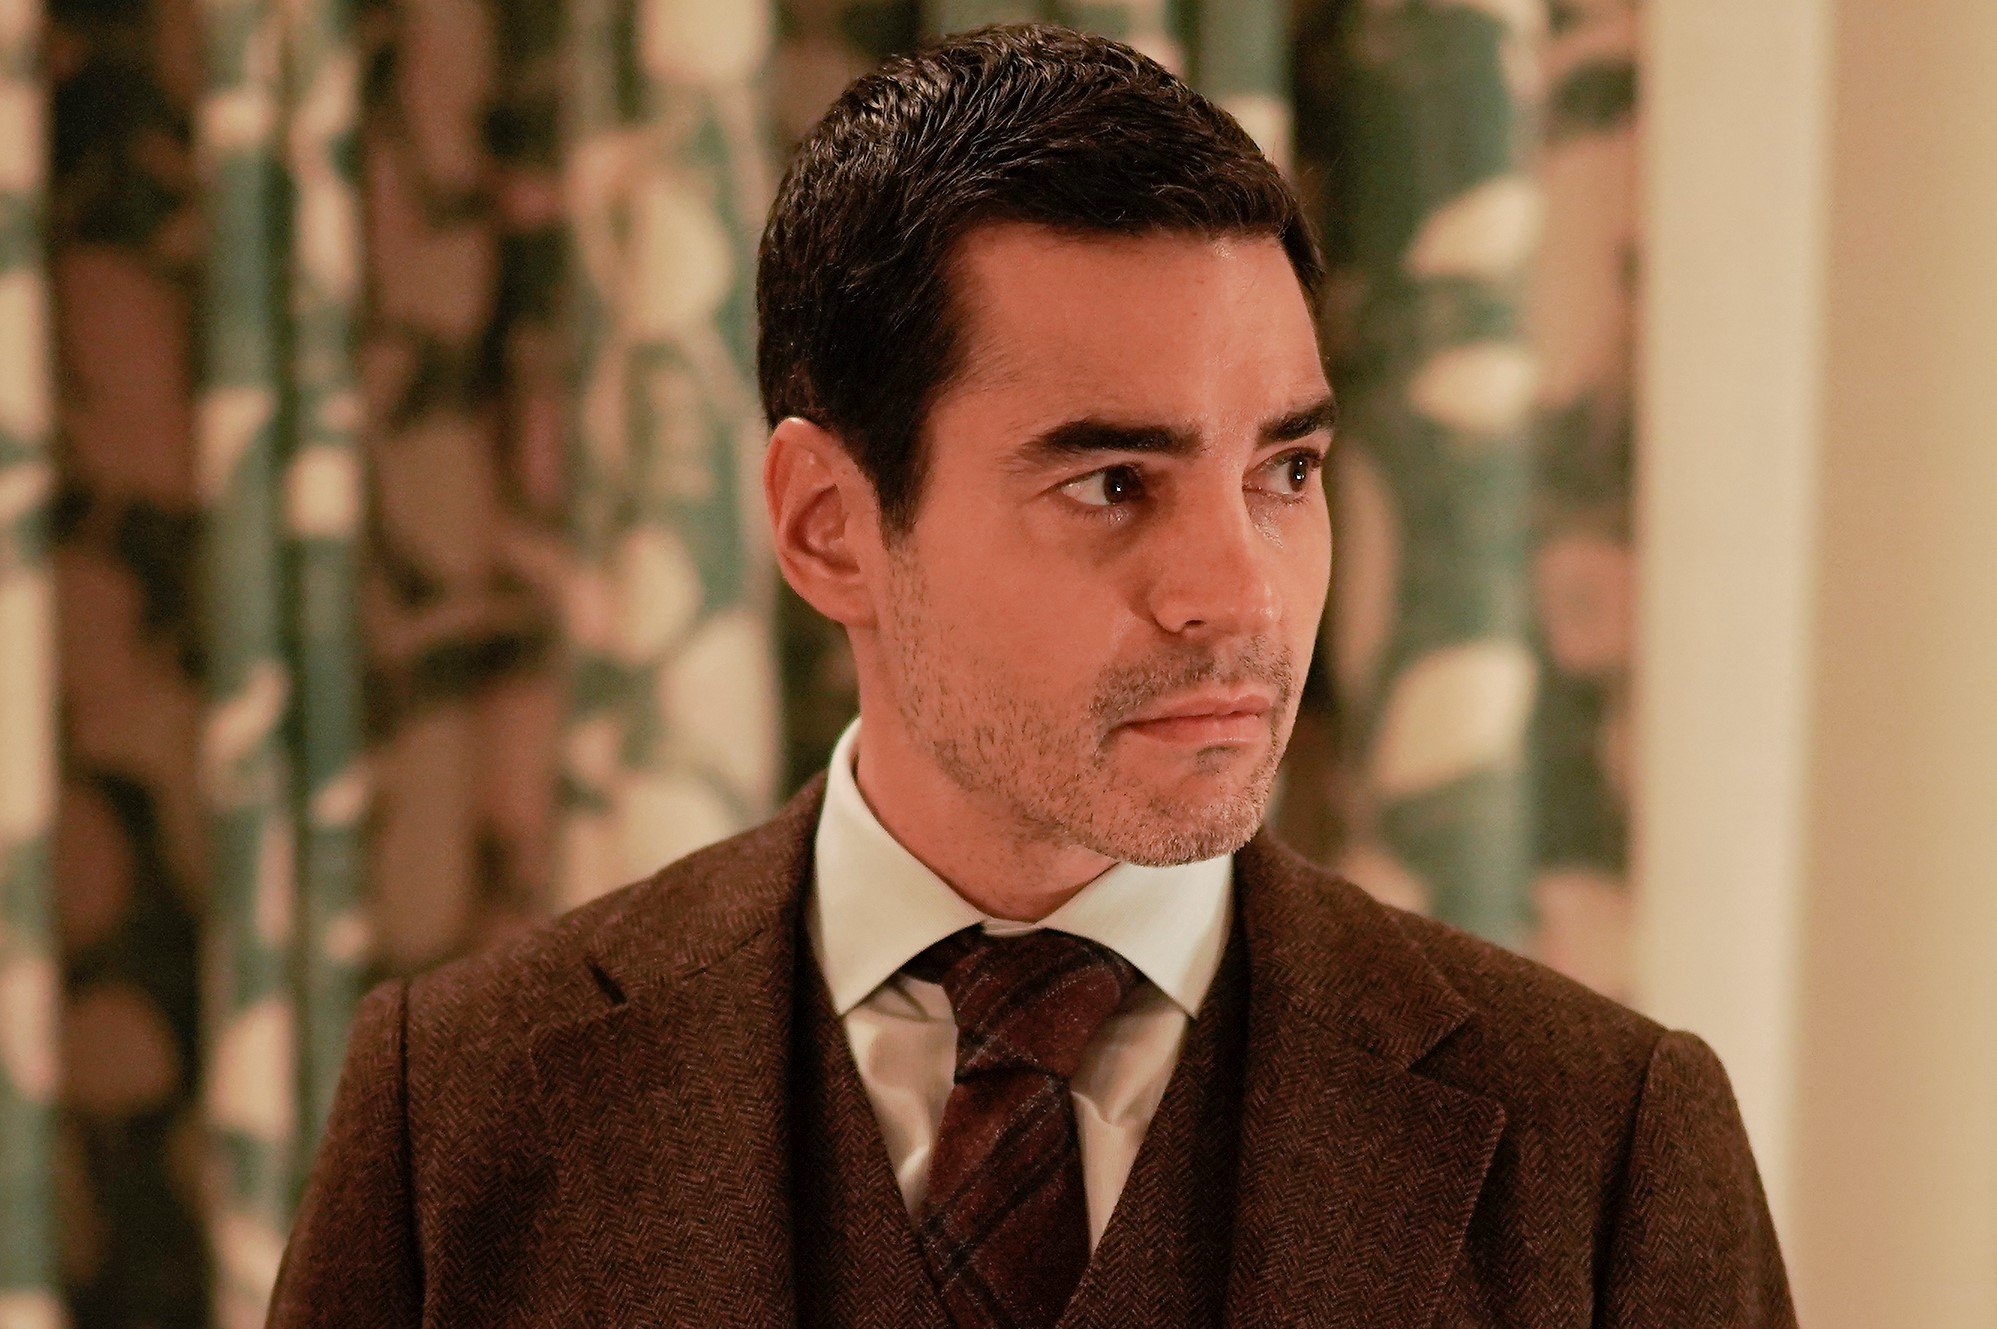 Ramón Rodríguez, in character as Will Trent in 'Will Trent' Season 1, which doesn't air a new episode tonight, Feb. 7, wears a brown three-piece suit over a white button-up shirt and dark red plaid tie.